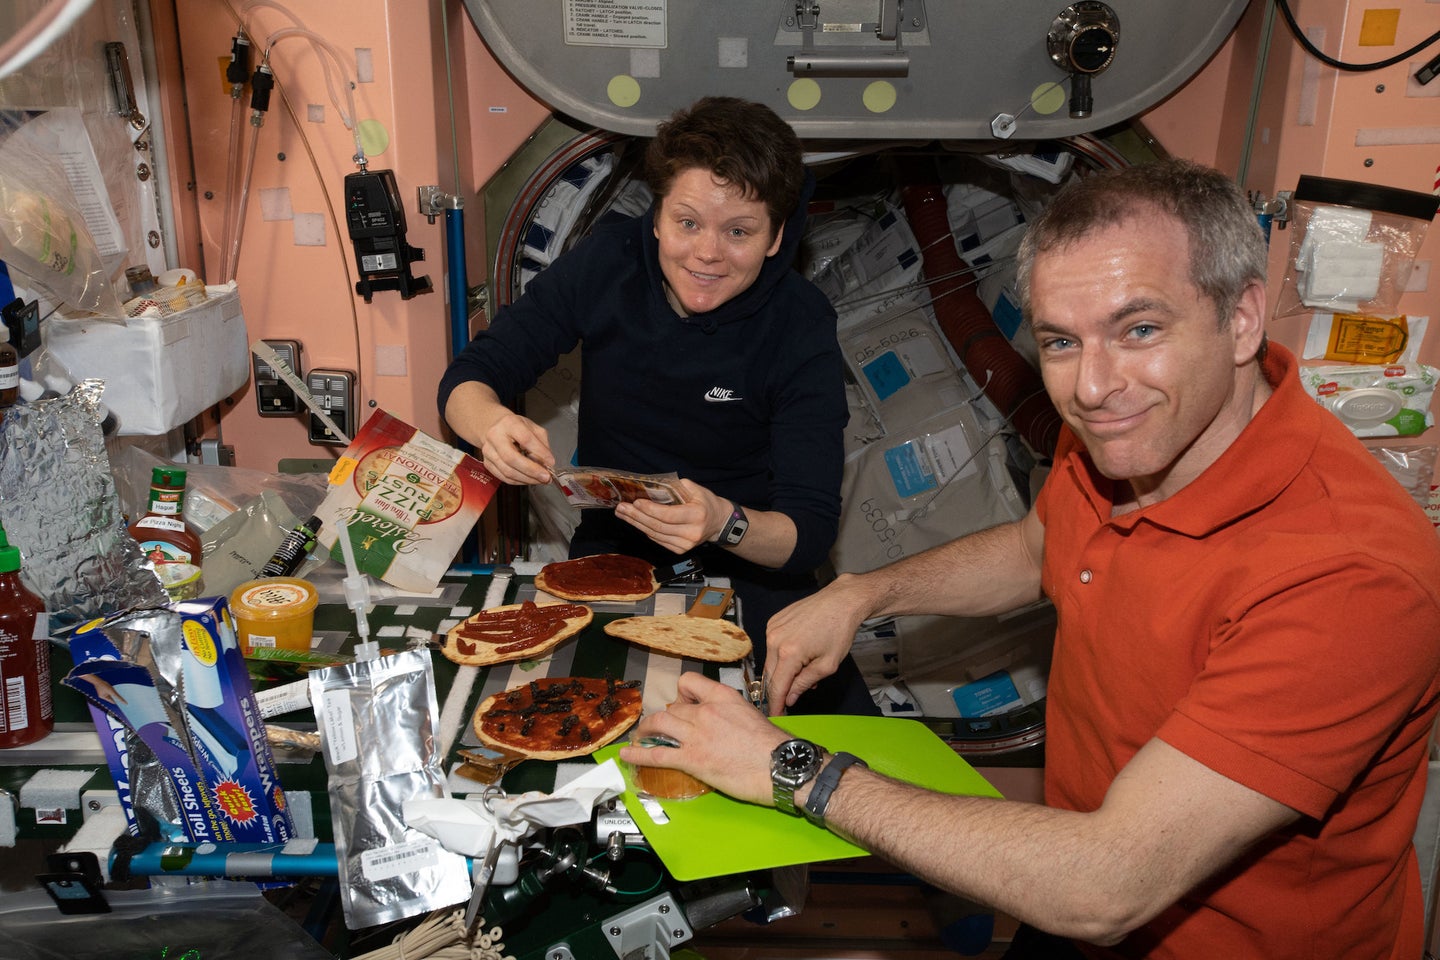 two astronauts in the international space station prepare pizza